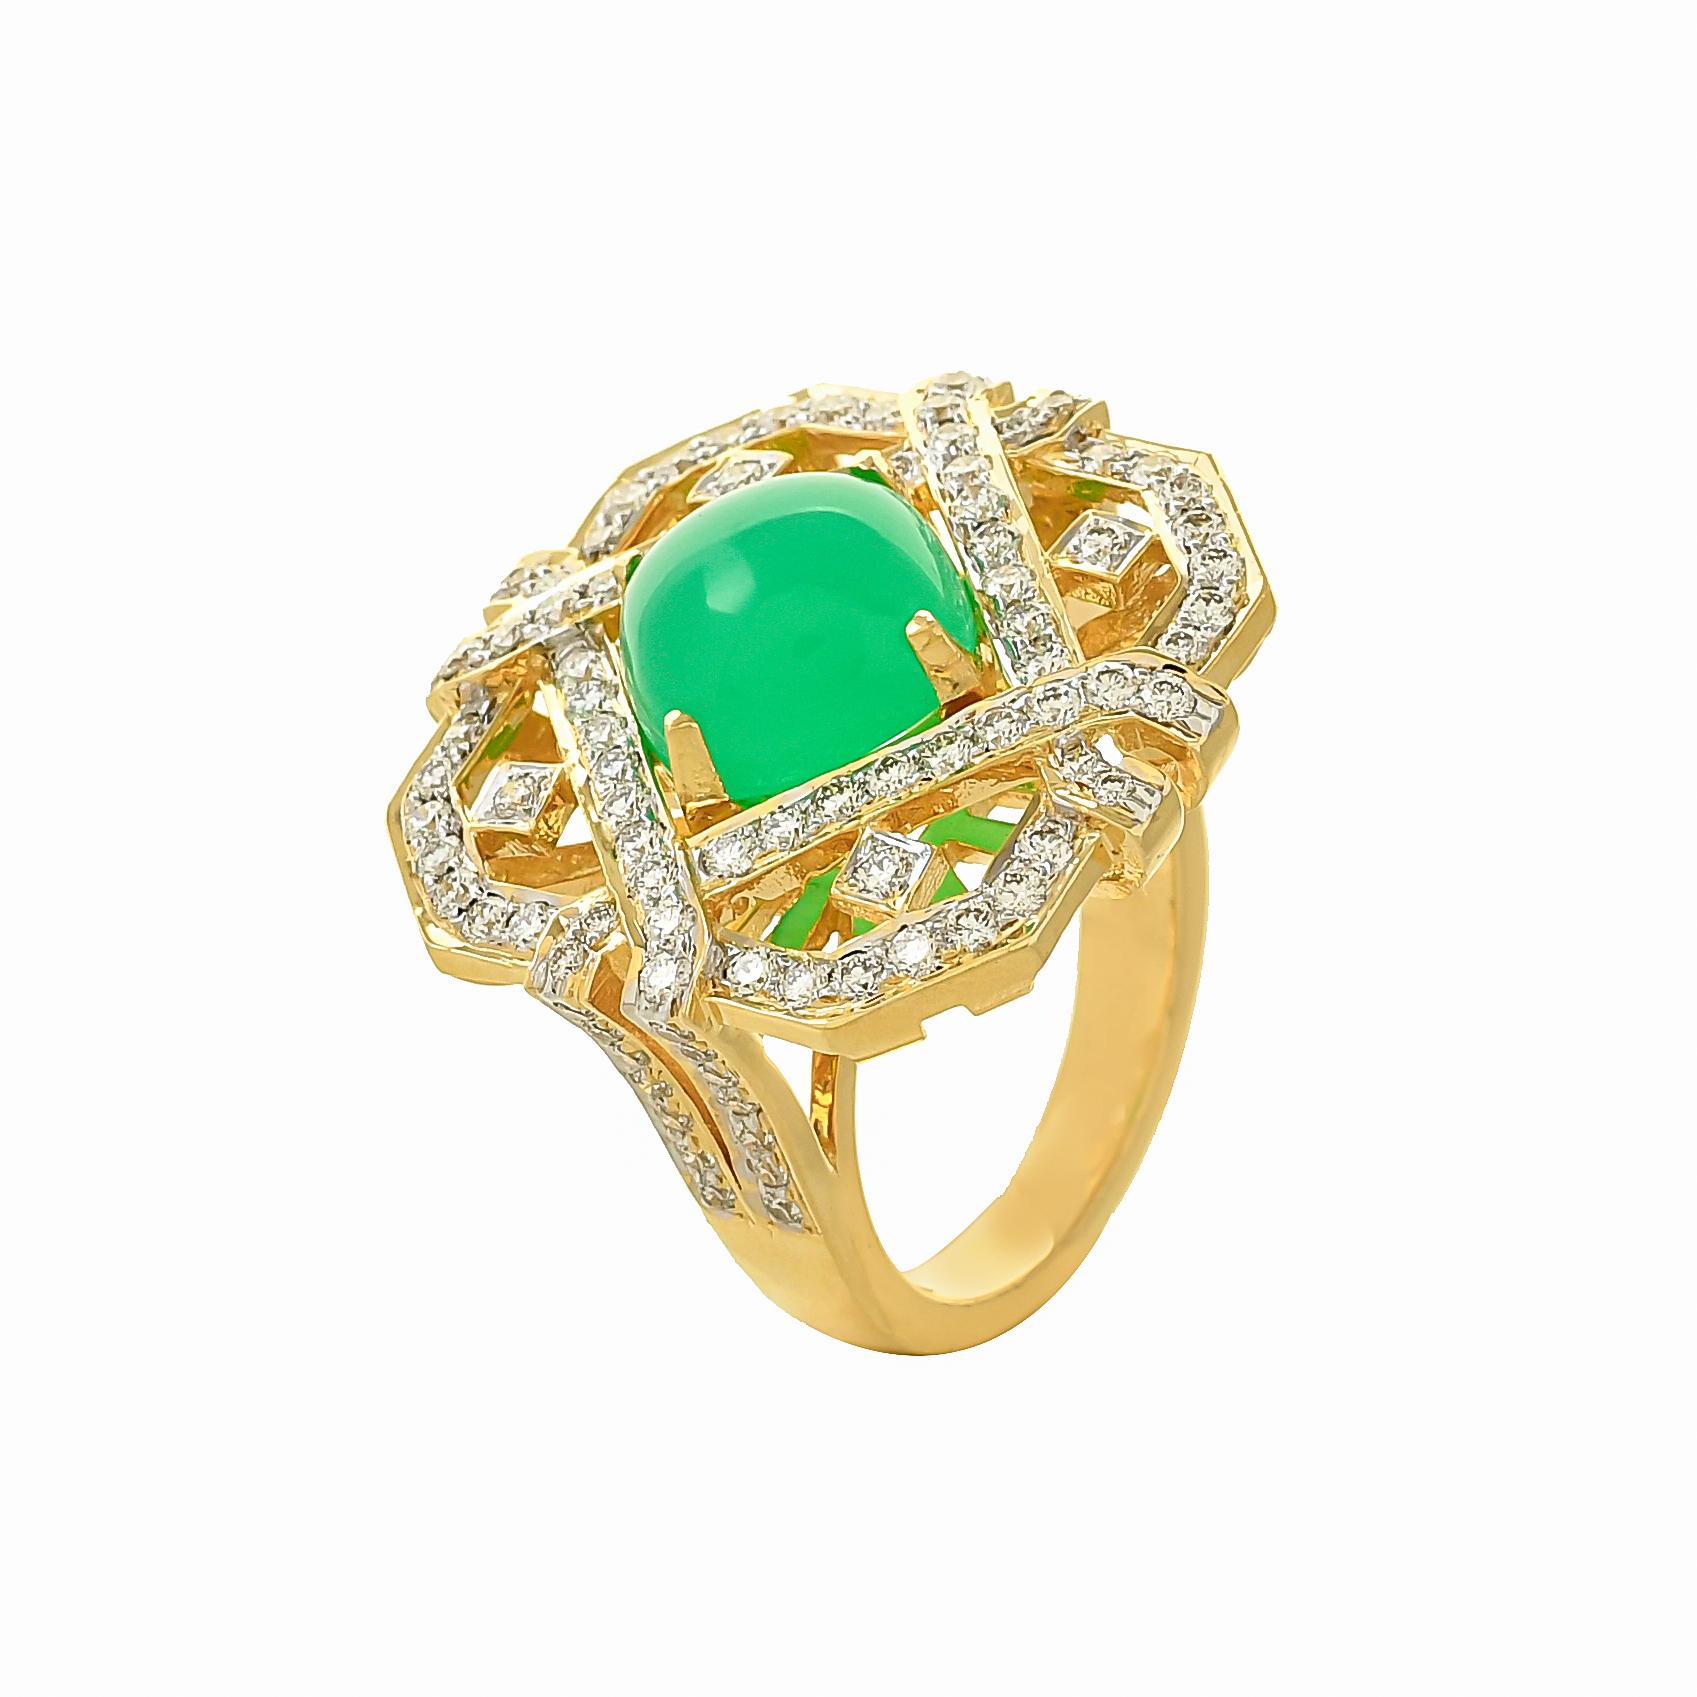 Cabochon 4.72 Carat Chrysoprase and Diamond 18 Karat Yellow Gold Ring For Sale